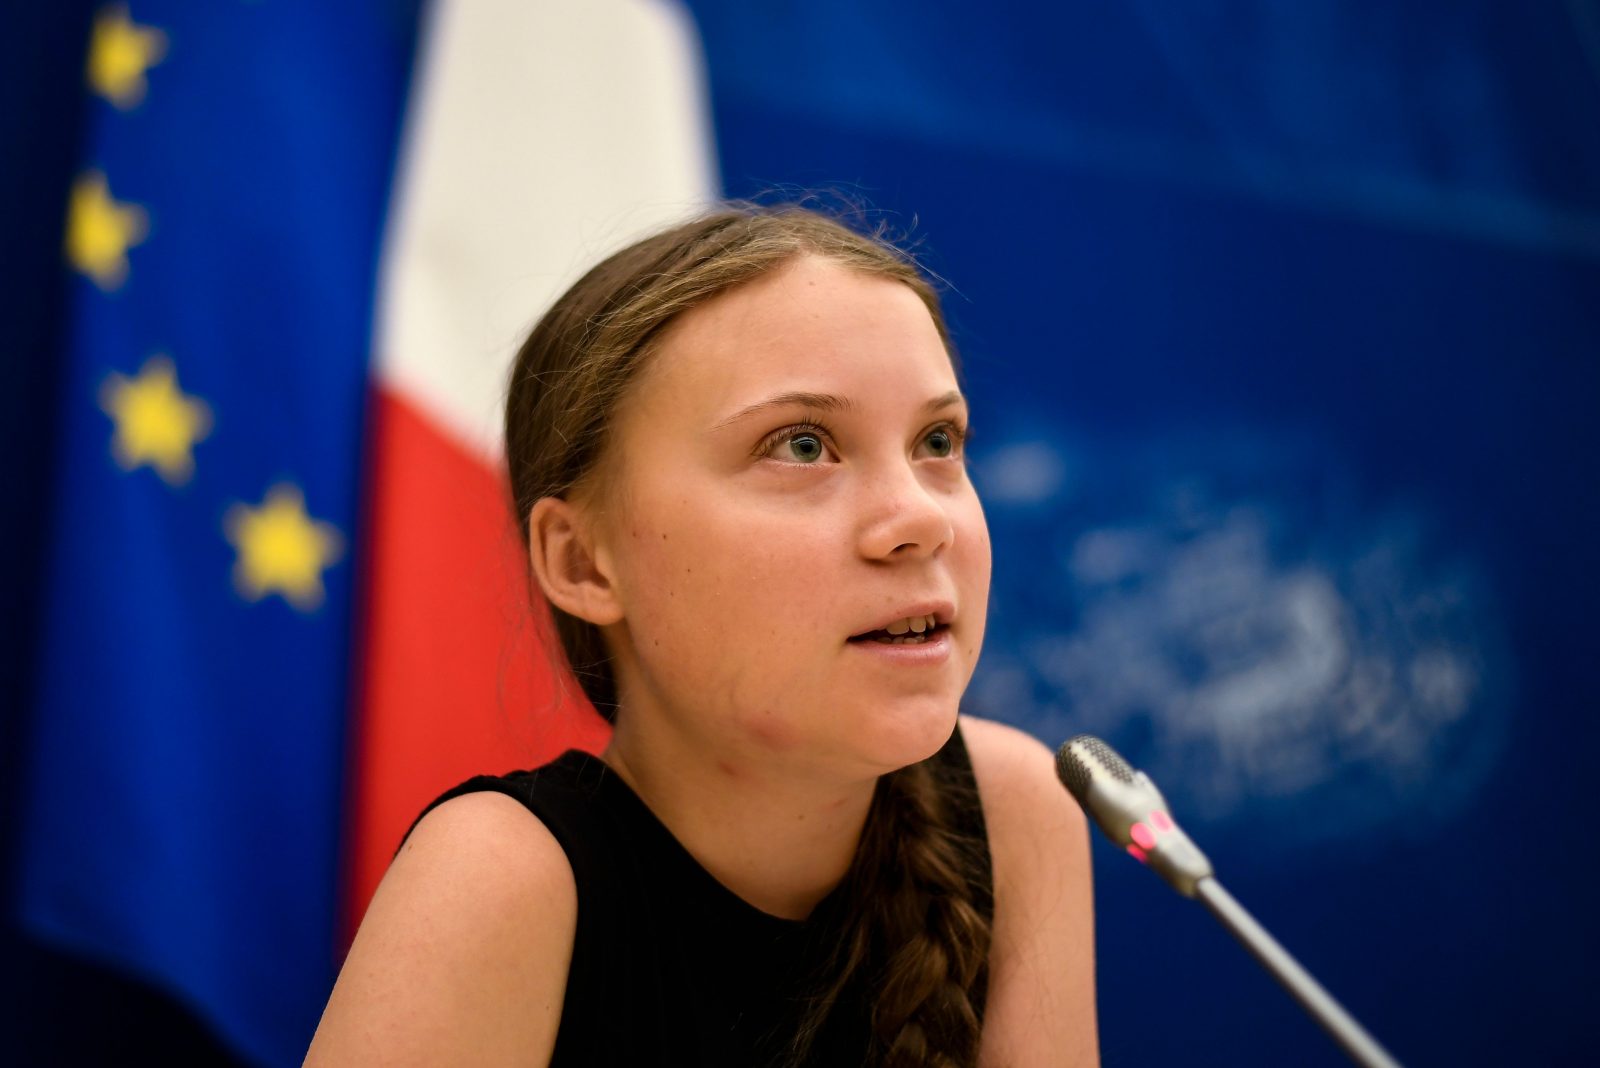 greta-thunberg-adds-her-voice-to-a-new-song-by-the-1975-grist